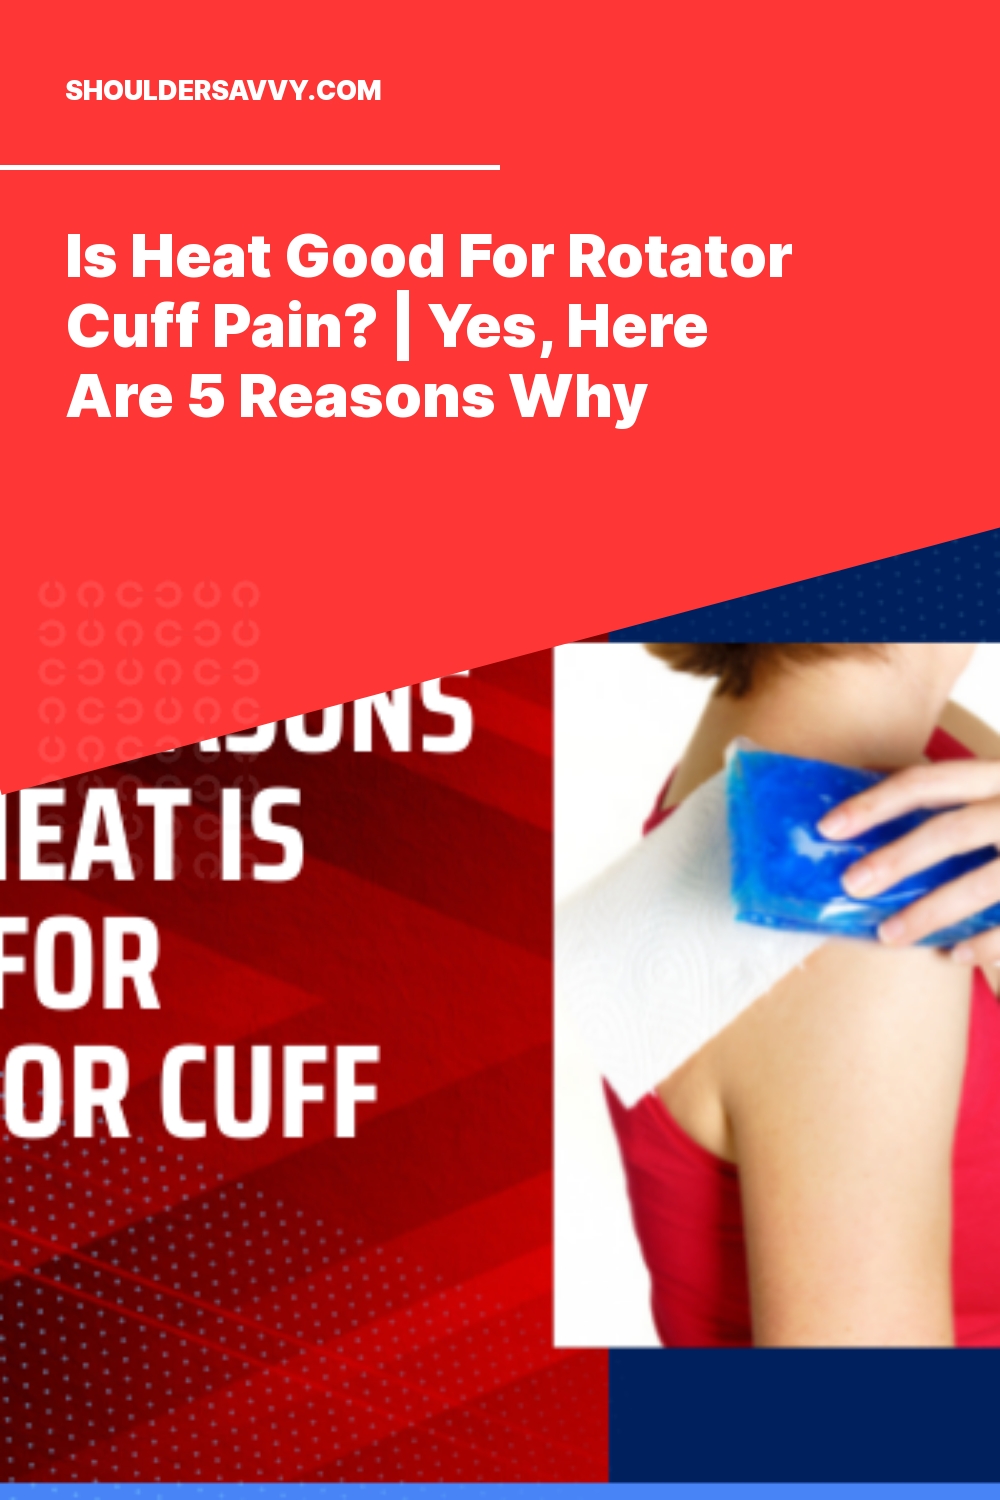 Is Heat Good For Rotator Cuff Pain? | Yes, Here Are 5 Reasons Why